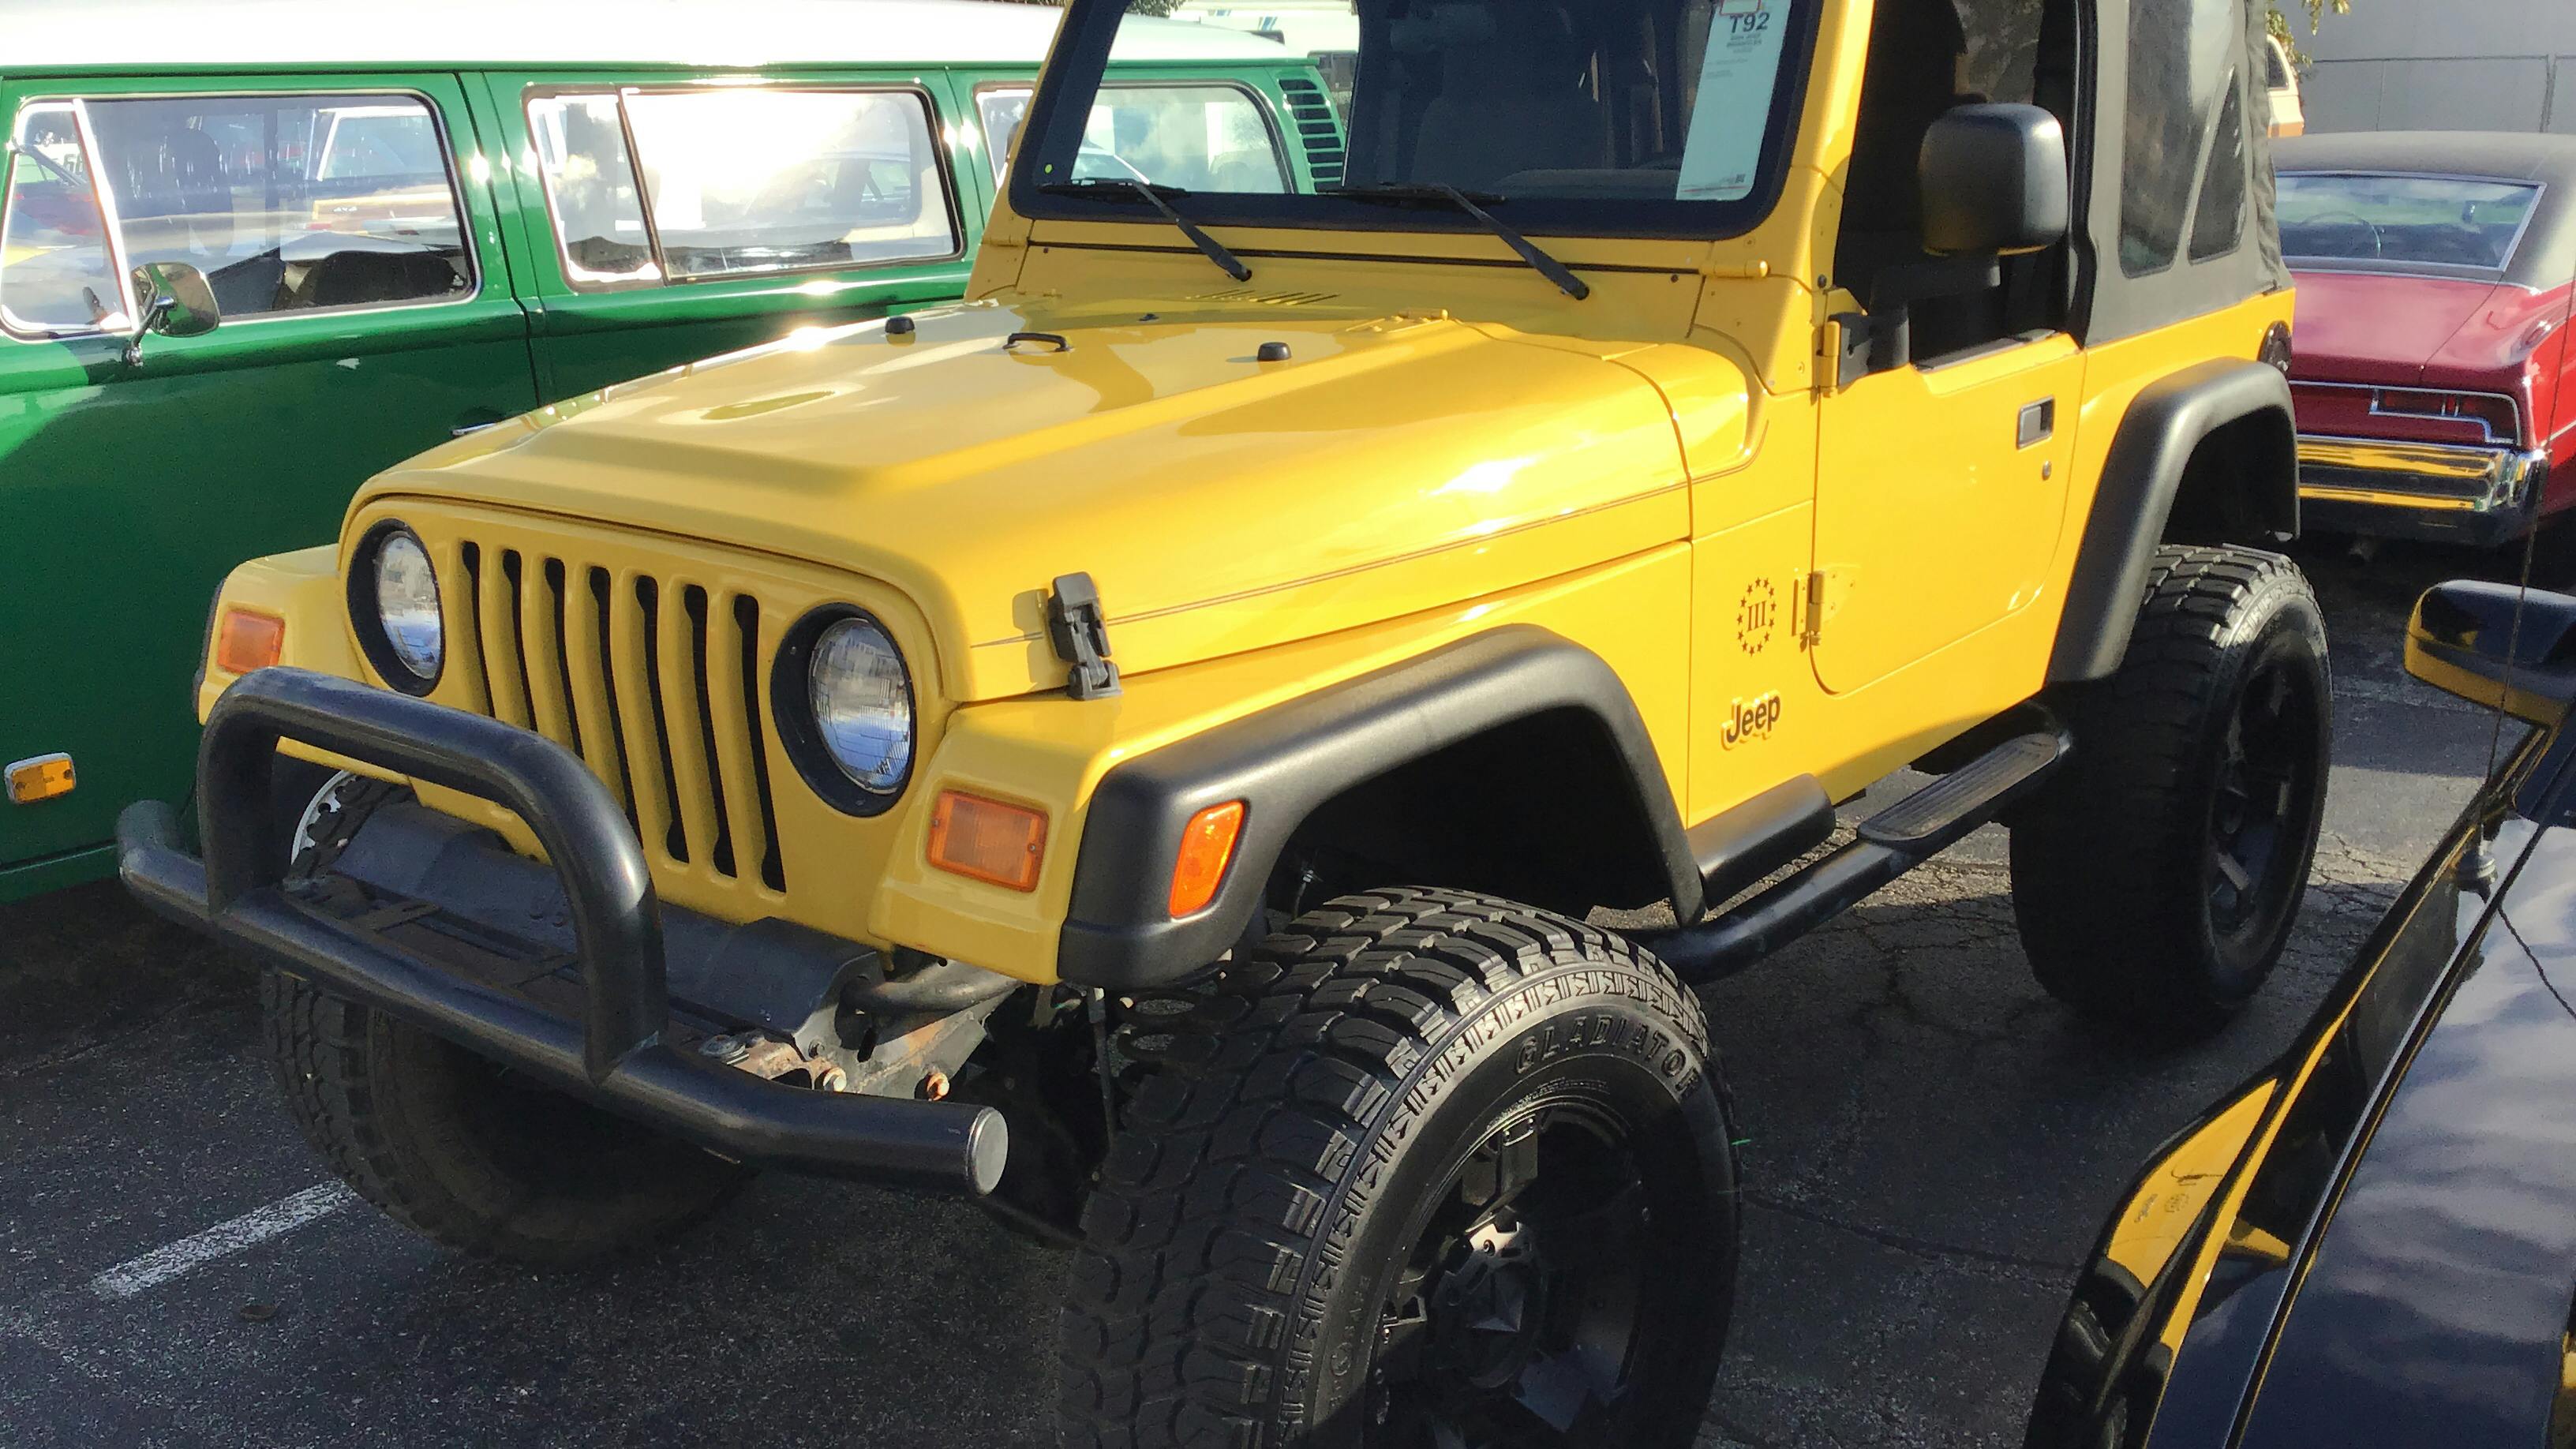 2003 Jeep Wrangler SE | Hagerty Valuation Tools